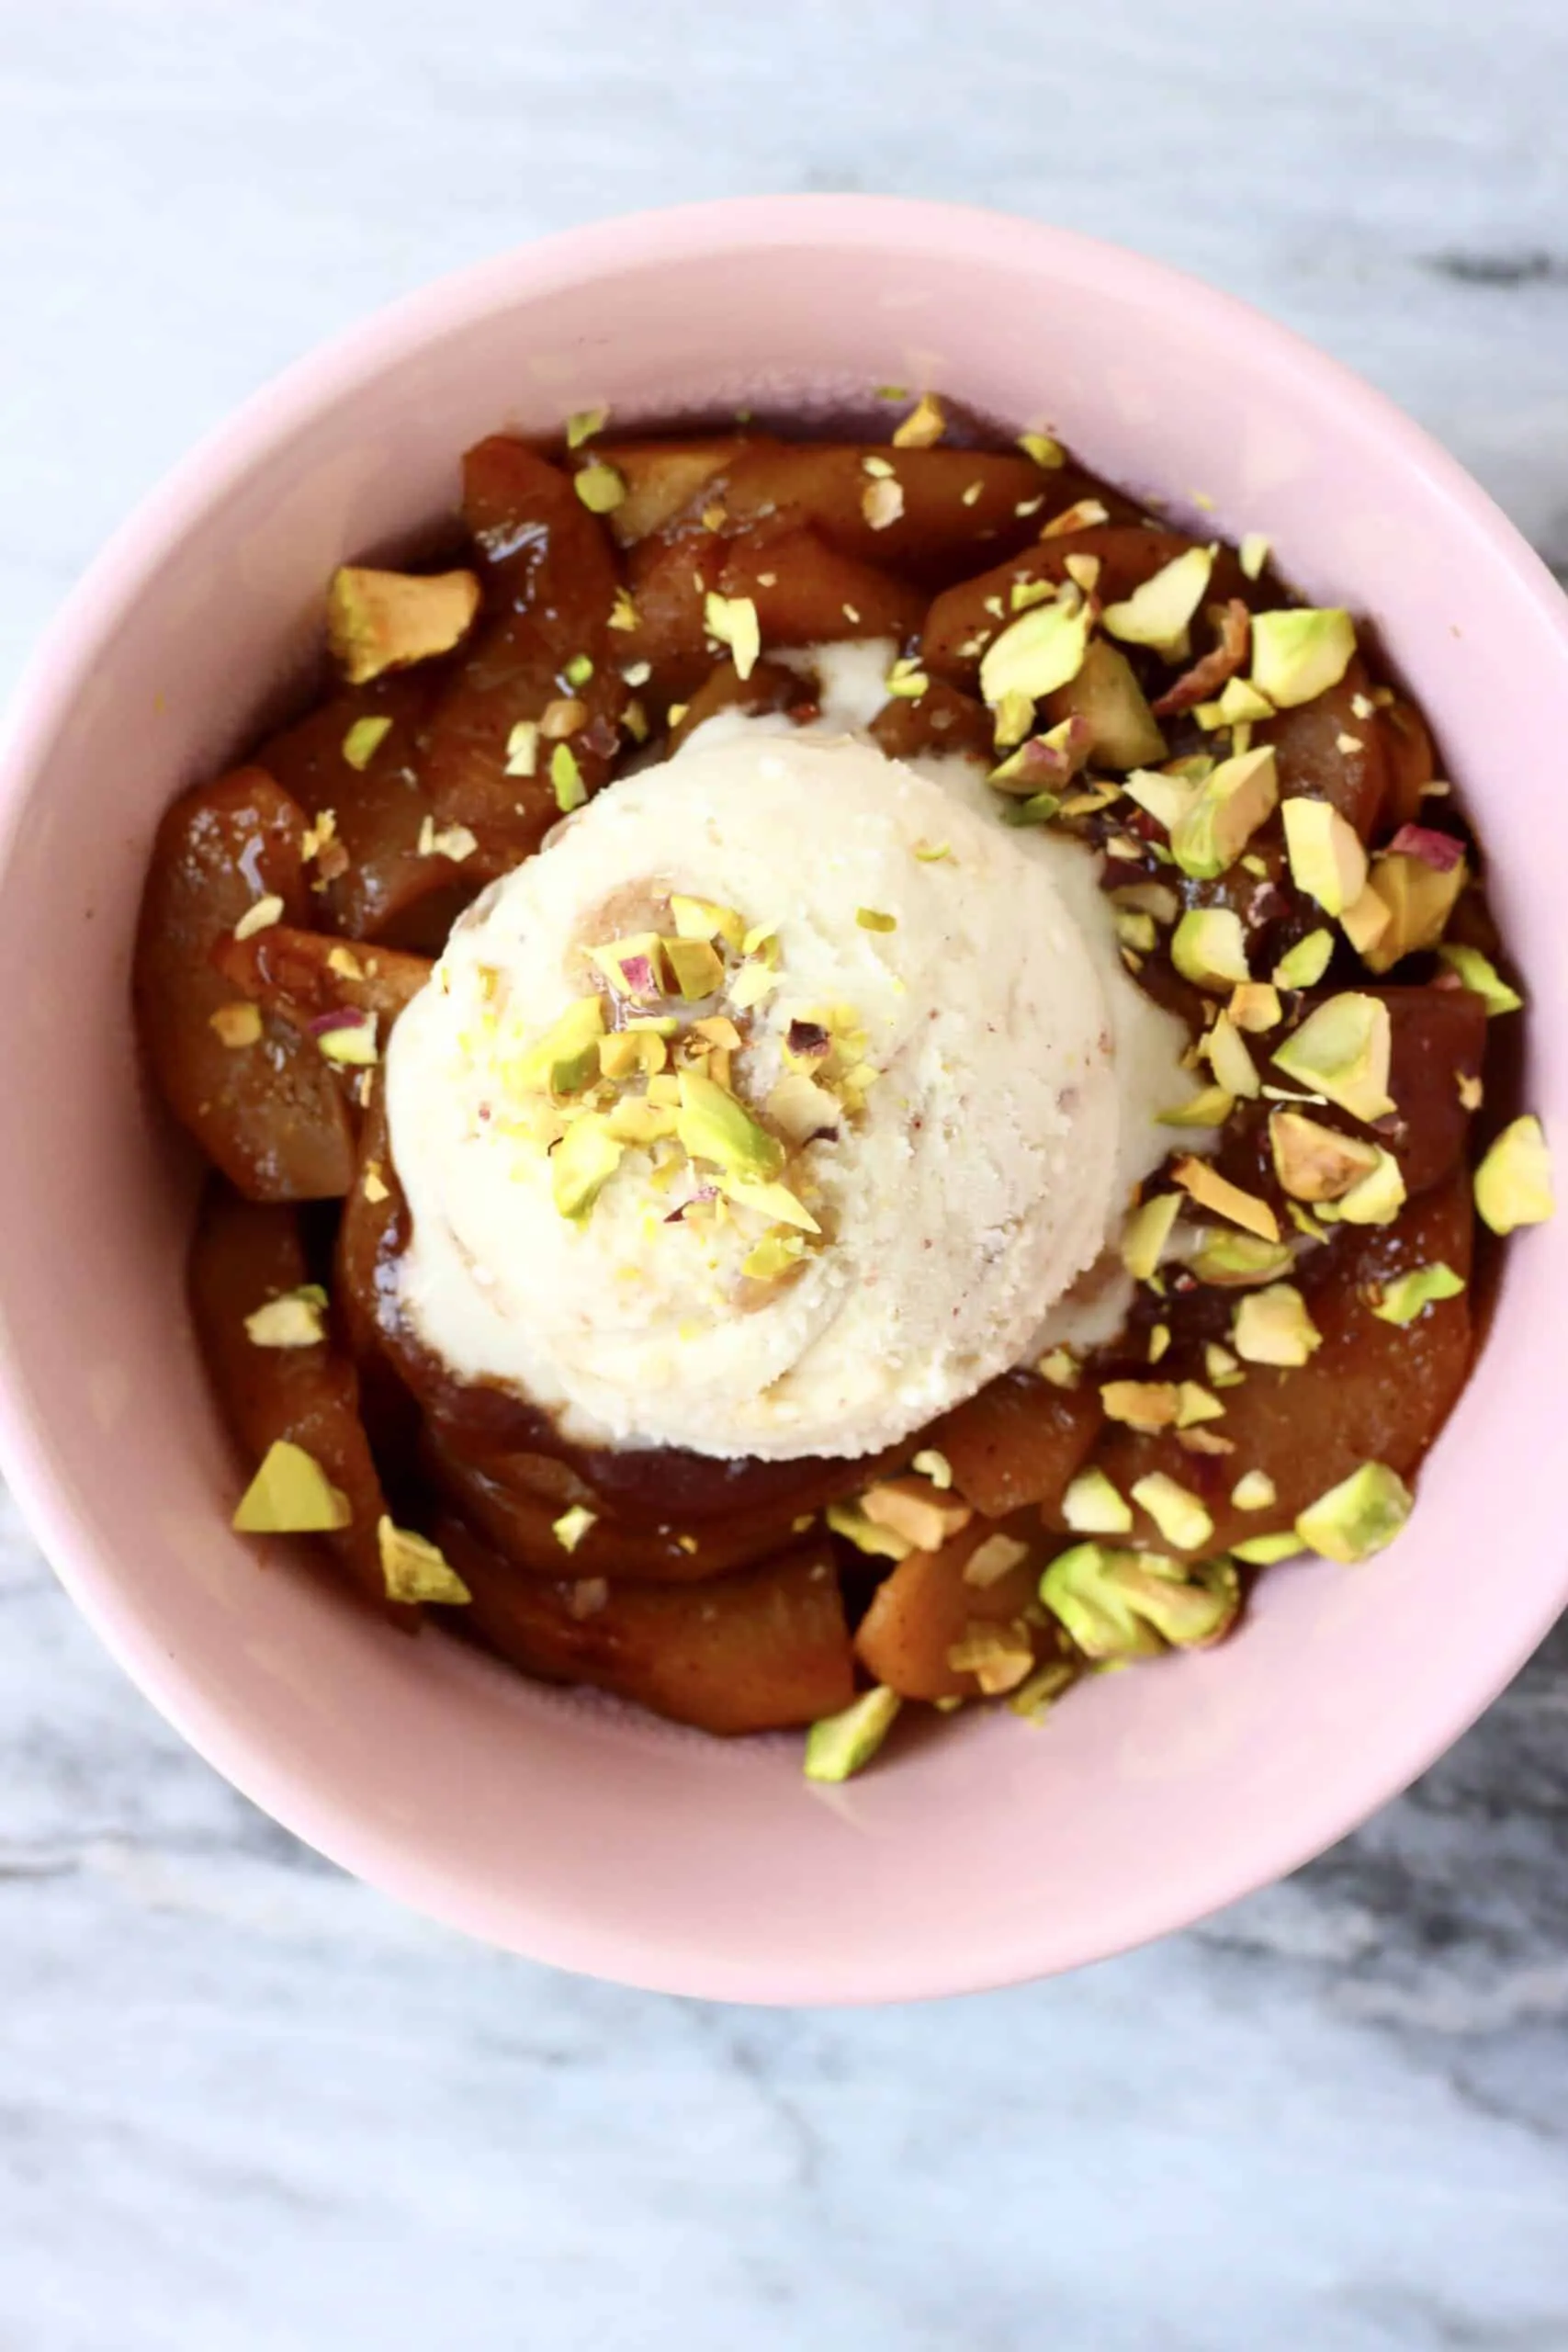 Sliced baked apples in a bowl scattered with chopped pistachio nuts and topped with ice cream